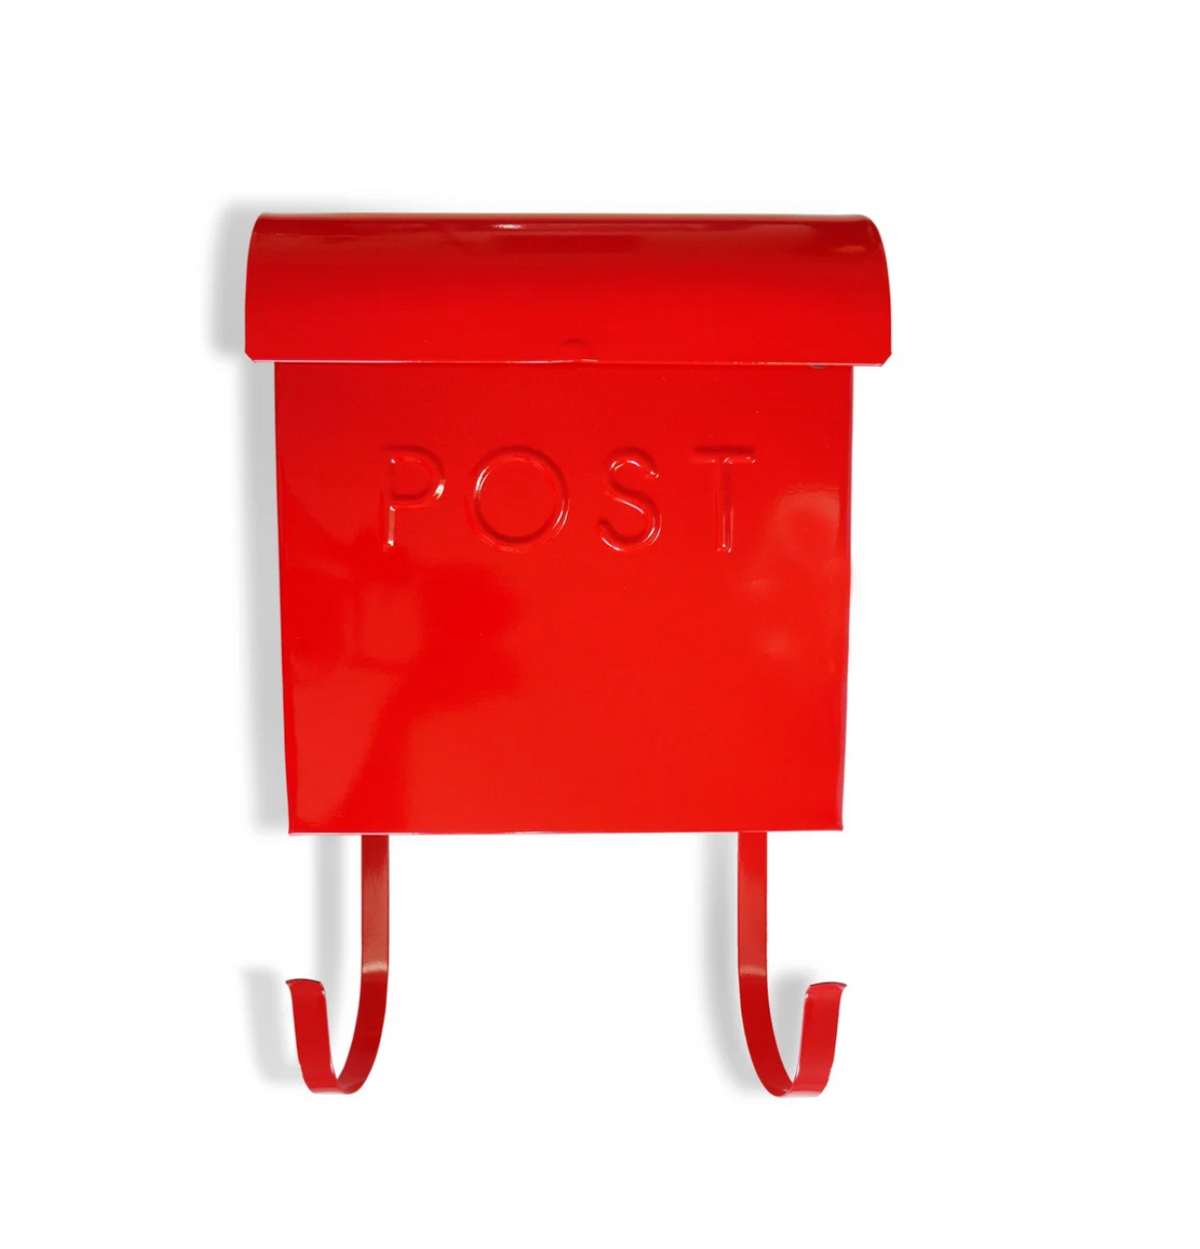 Euro POST Mailbox in Red